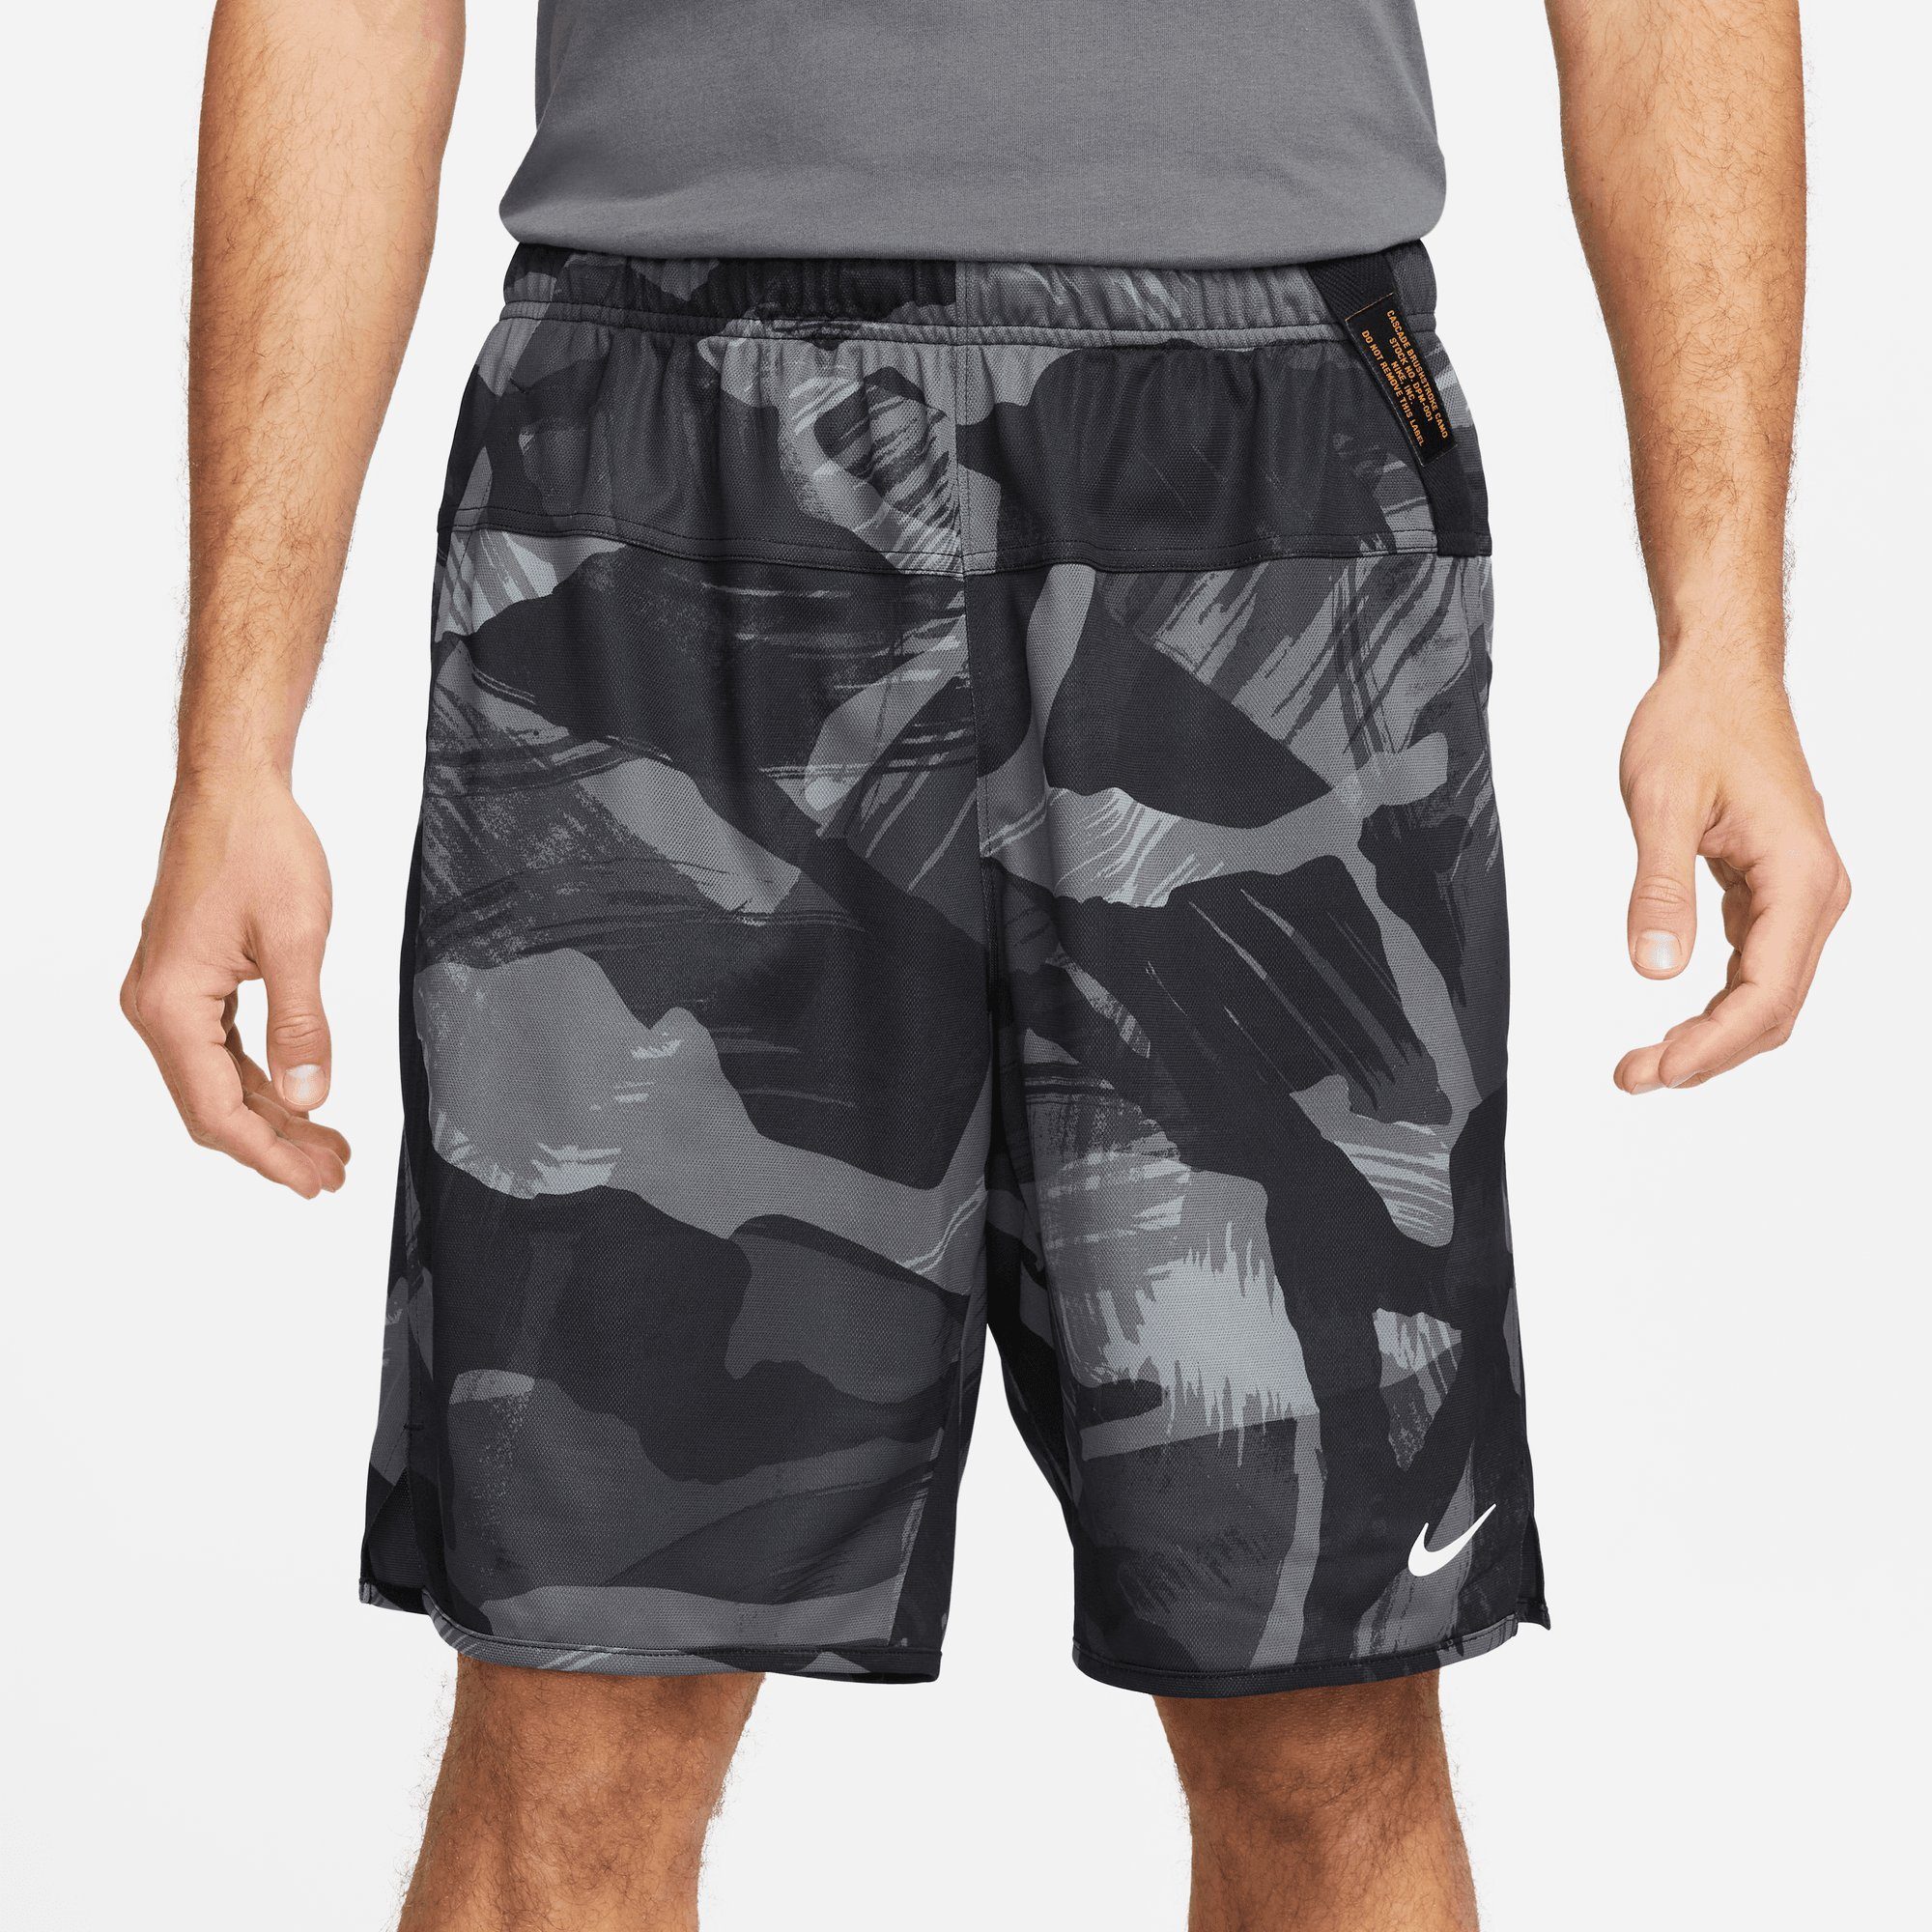 BLACK/GOLD DRI-FIT TOTALITY SHORTS SUEDE/COCONUT Trainingsshorts Nike UNLINED CAMO FITNESS MEN'S " MILK